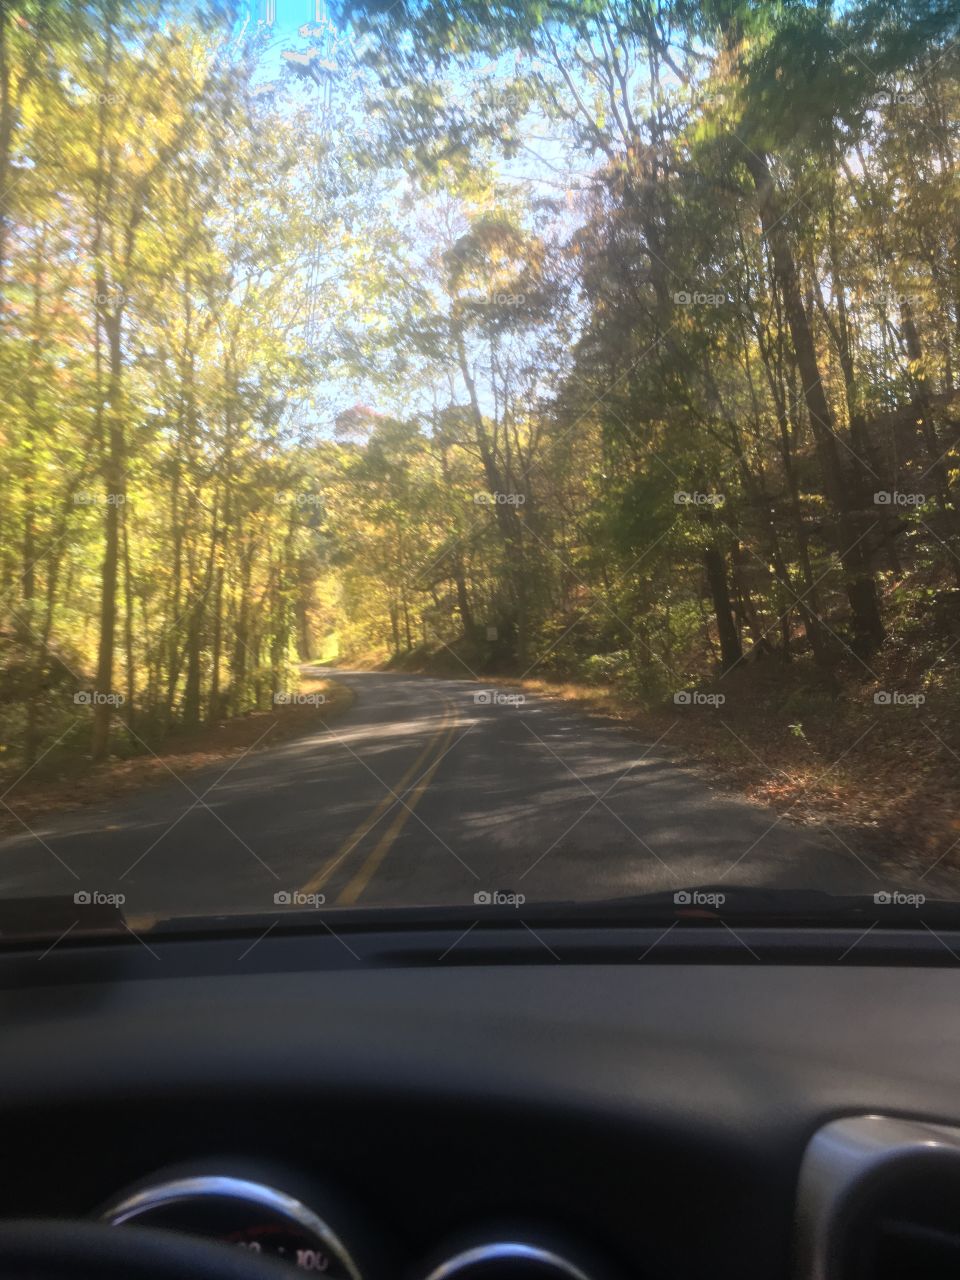 Driving the back roads 